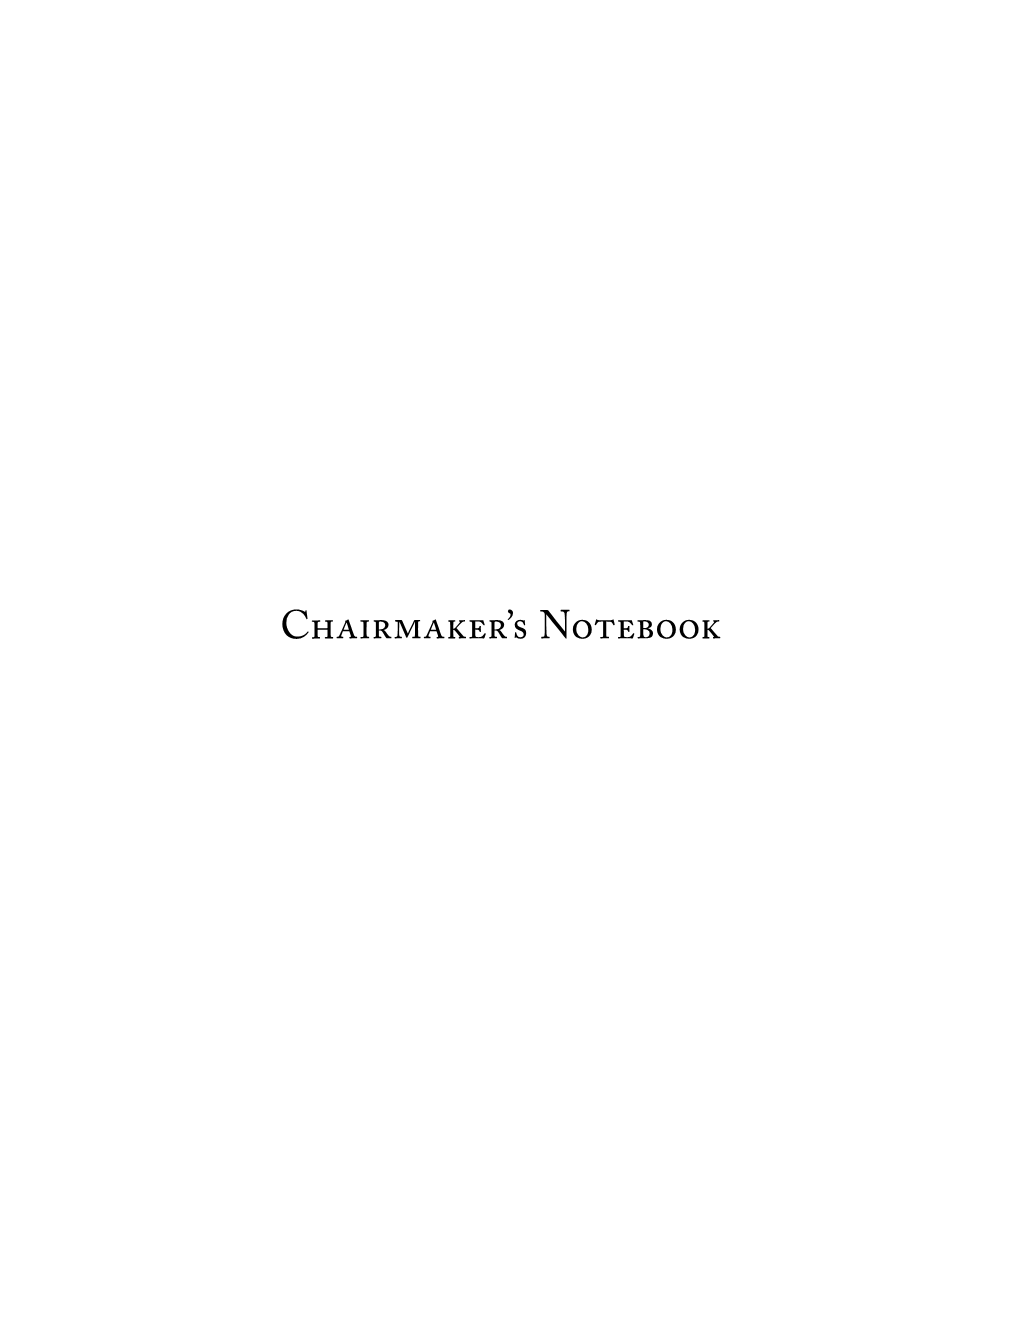 Chairmaker's Notebook